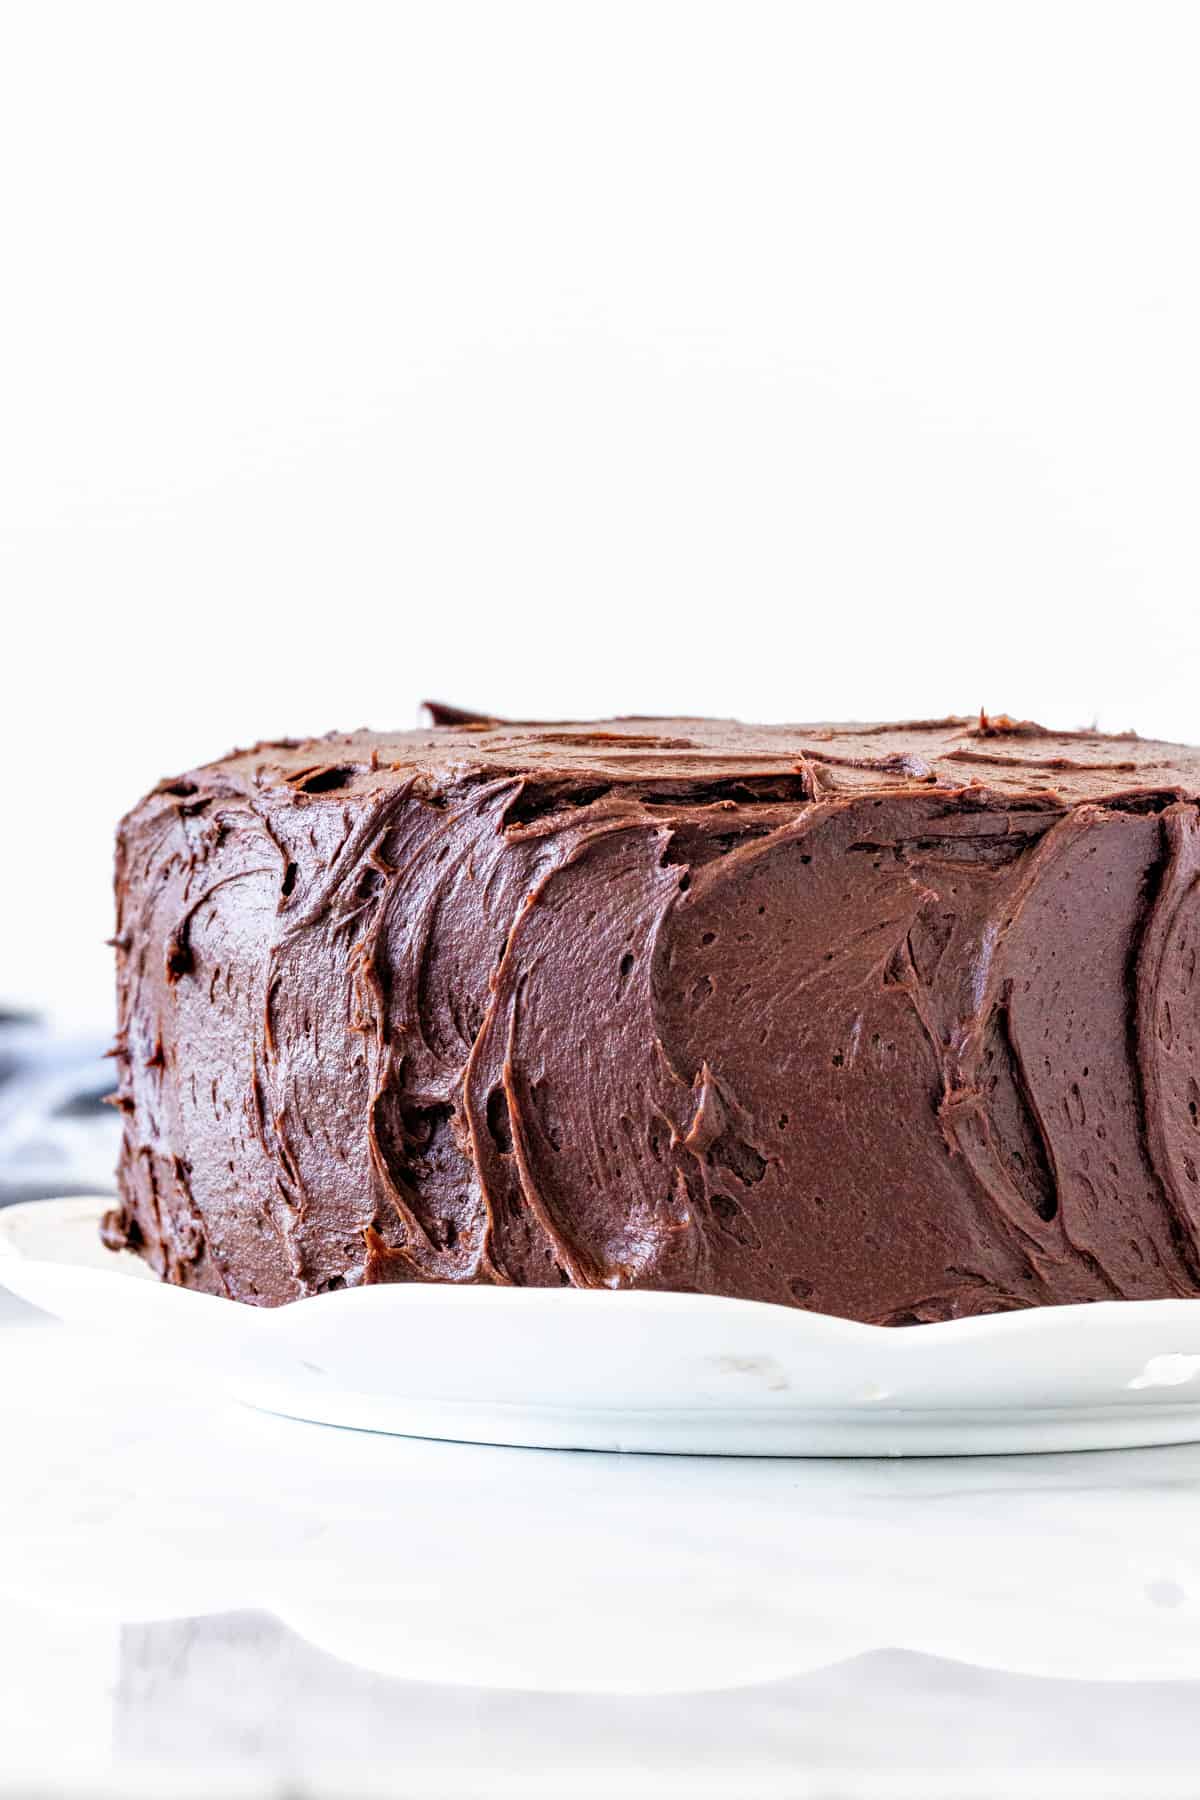 Chocolate layer cake with chocolate frosting.